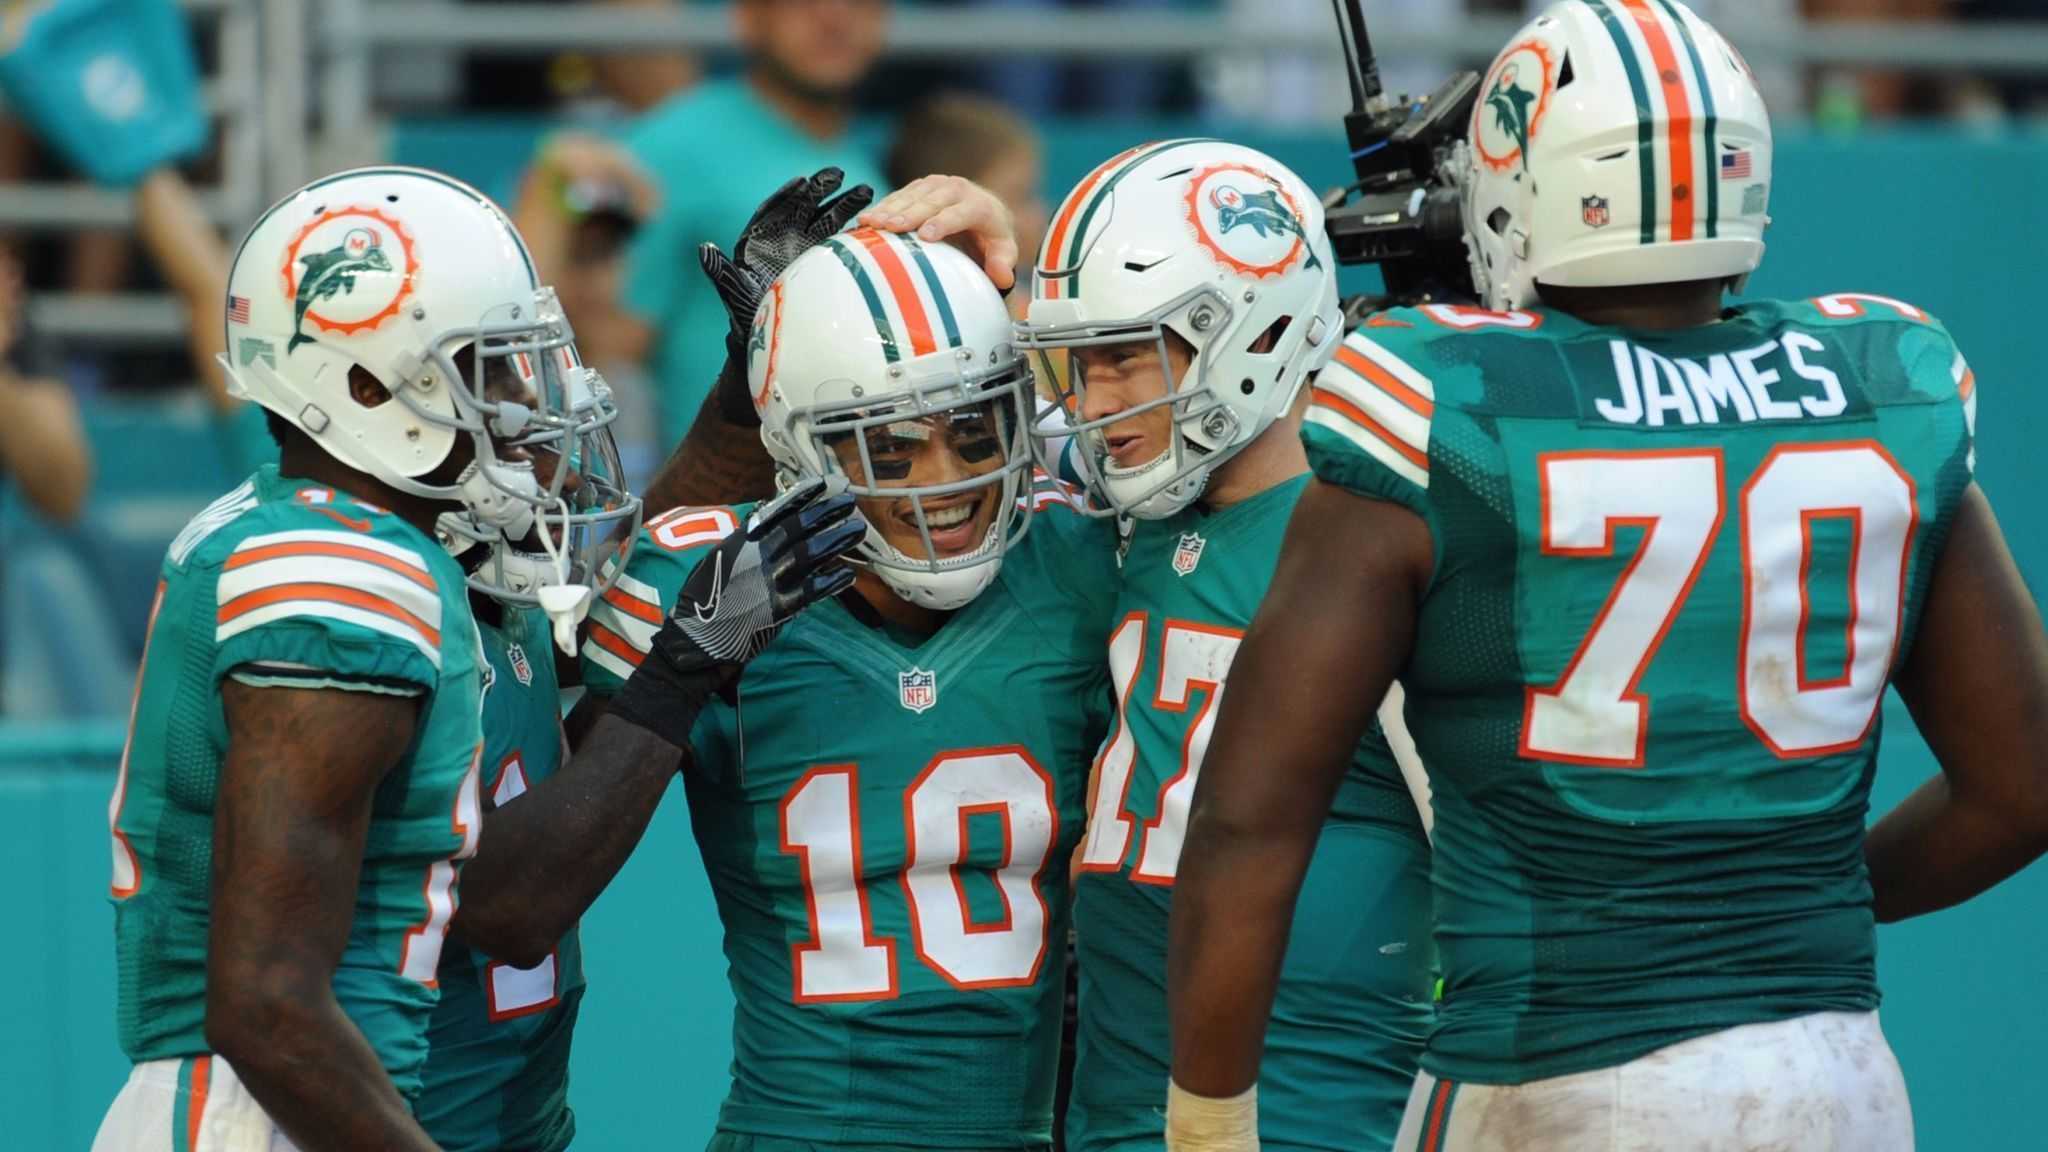  The Dolphins Will Be Wearing Their Throwbacks, Move To 8-7